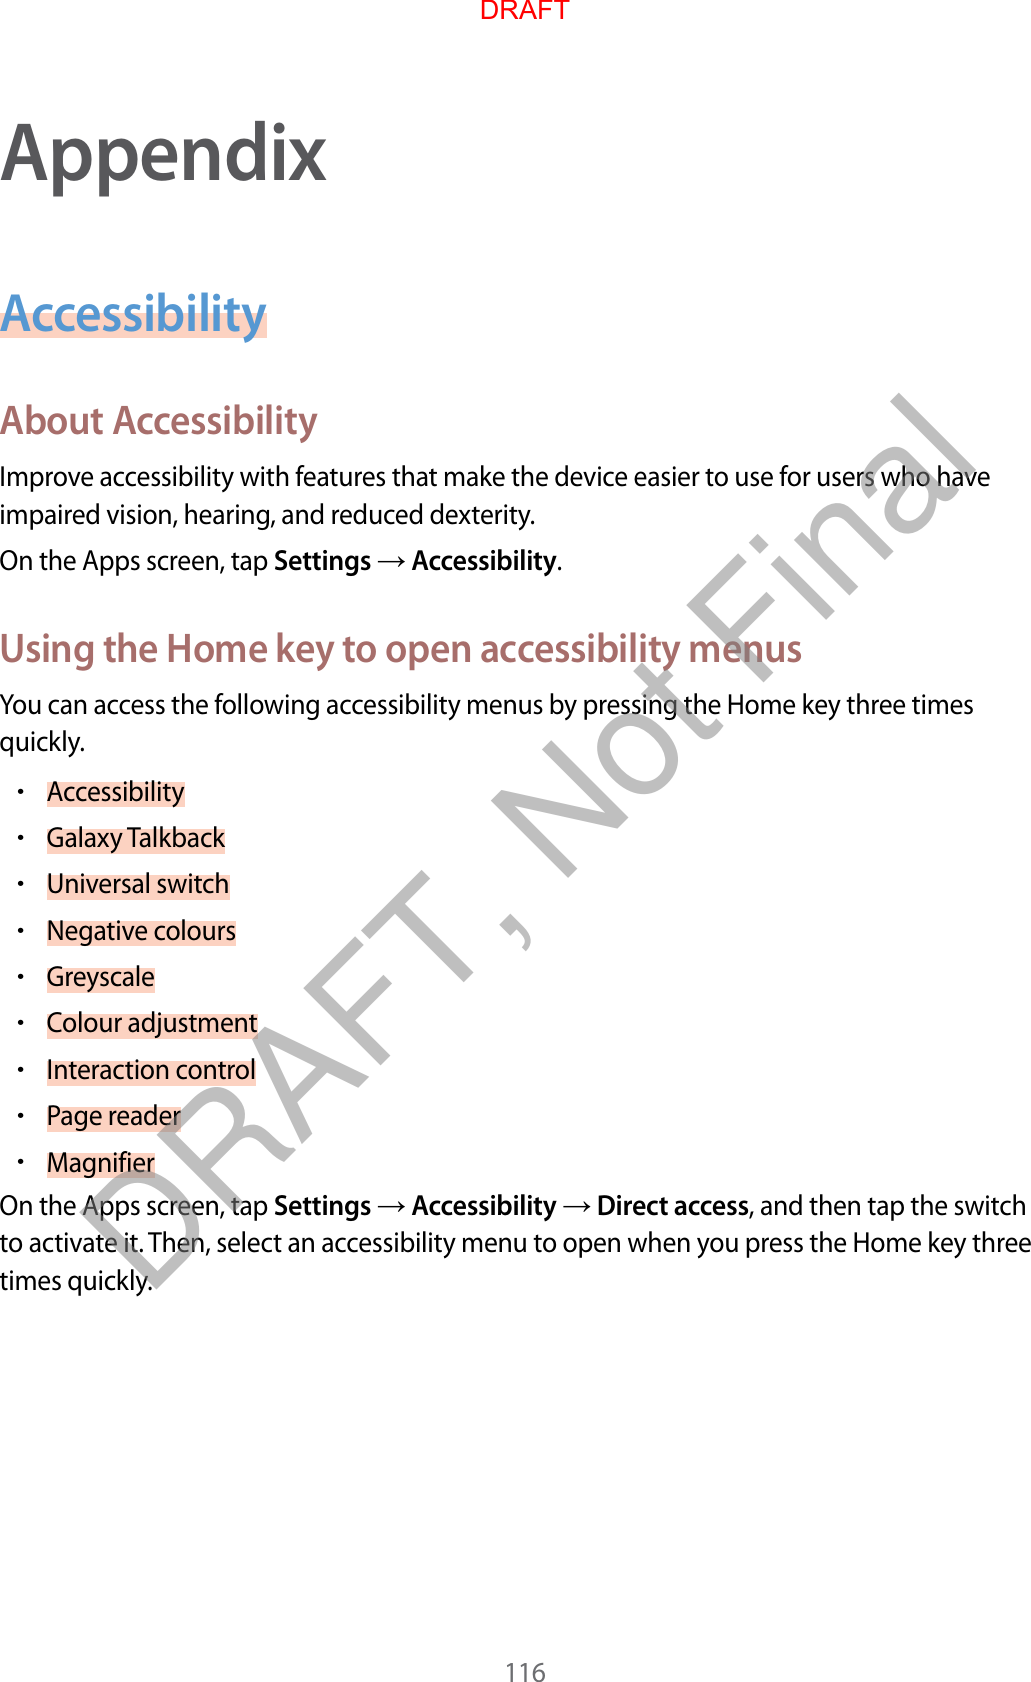 116AppendixAccessibilityAbout AccessibilityImprove accessibility with features that make the device easier to use for users who have impaired vision, hearing, and reduced dexterity.On the Apps screen, tap Settings  Accessibility.Using the Home key to open accessibility menusYou can access the following accessibility menus by pressing the Home key three times quickly.•Accessibility•Galaxy Talkback•Universal switch•Negative colours•Greyscale•Colour adjustment•Interaction control•Page reader•MagnifierOn the Apps screen, tap Settings  Accessibility  Direct access, and then tap the switch to activate it. Then, select an accessibility menu to open when you press the Home key three times quickly.DRAFTDRAFT, Not Final